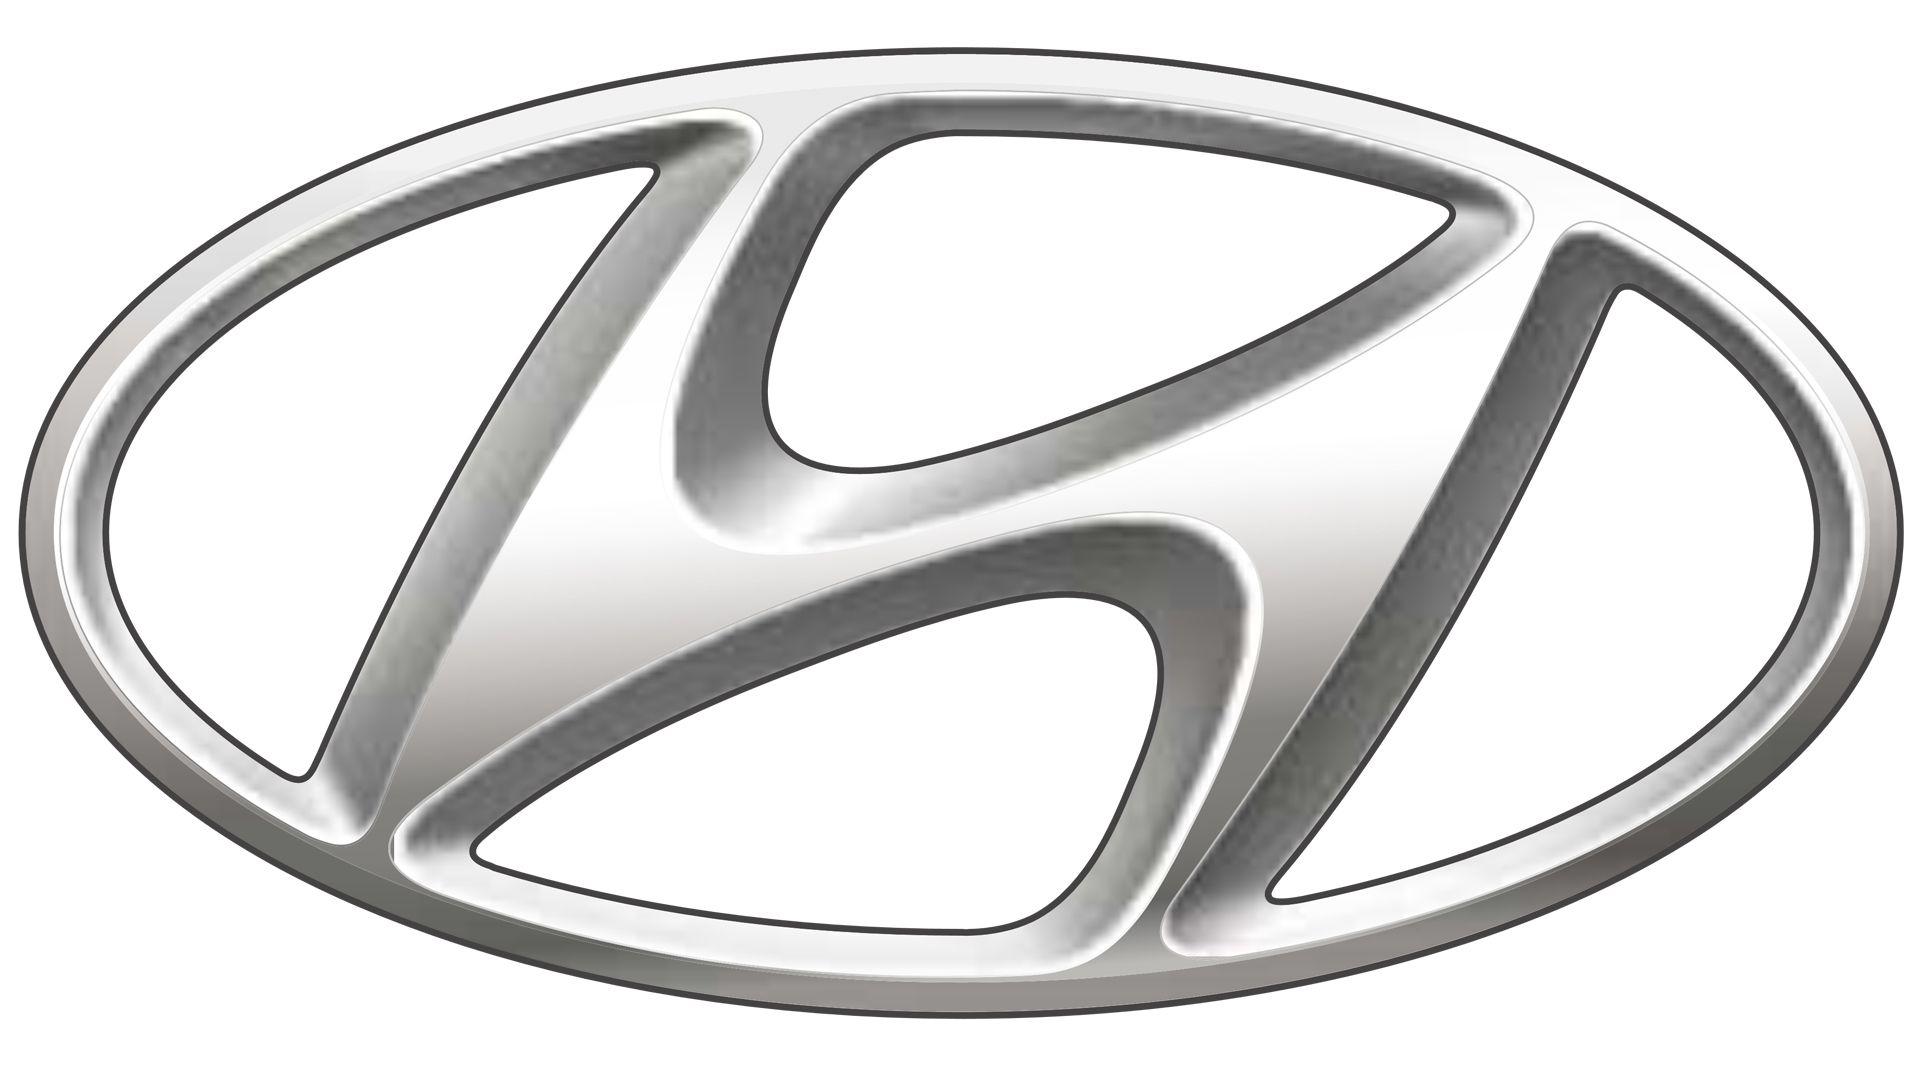 New Hyundai Logo - Hyundai logo: about meaning, history and new changes in official emblem